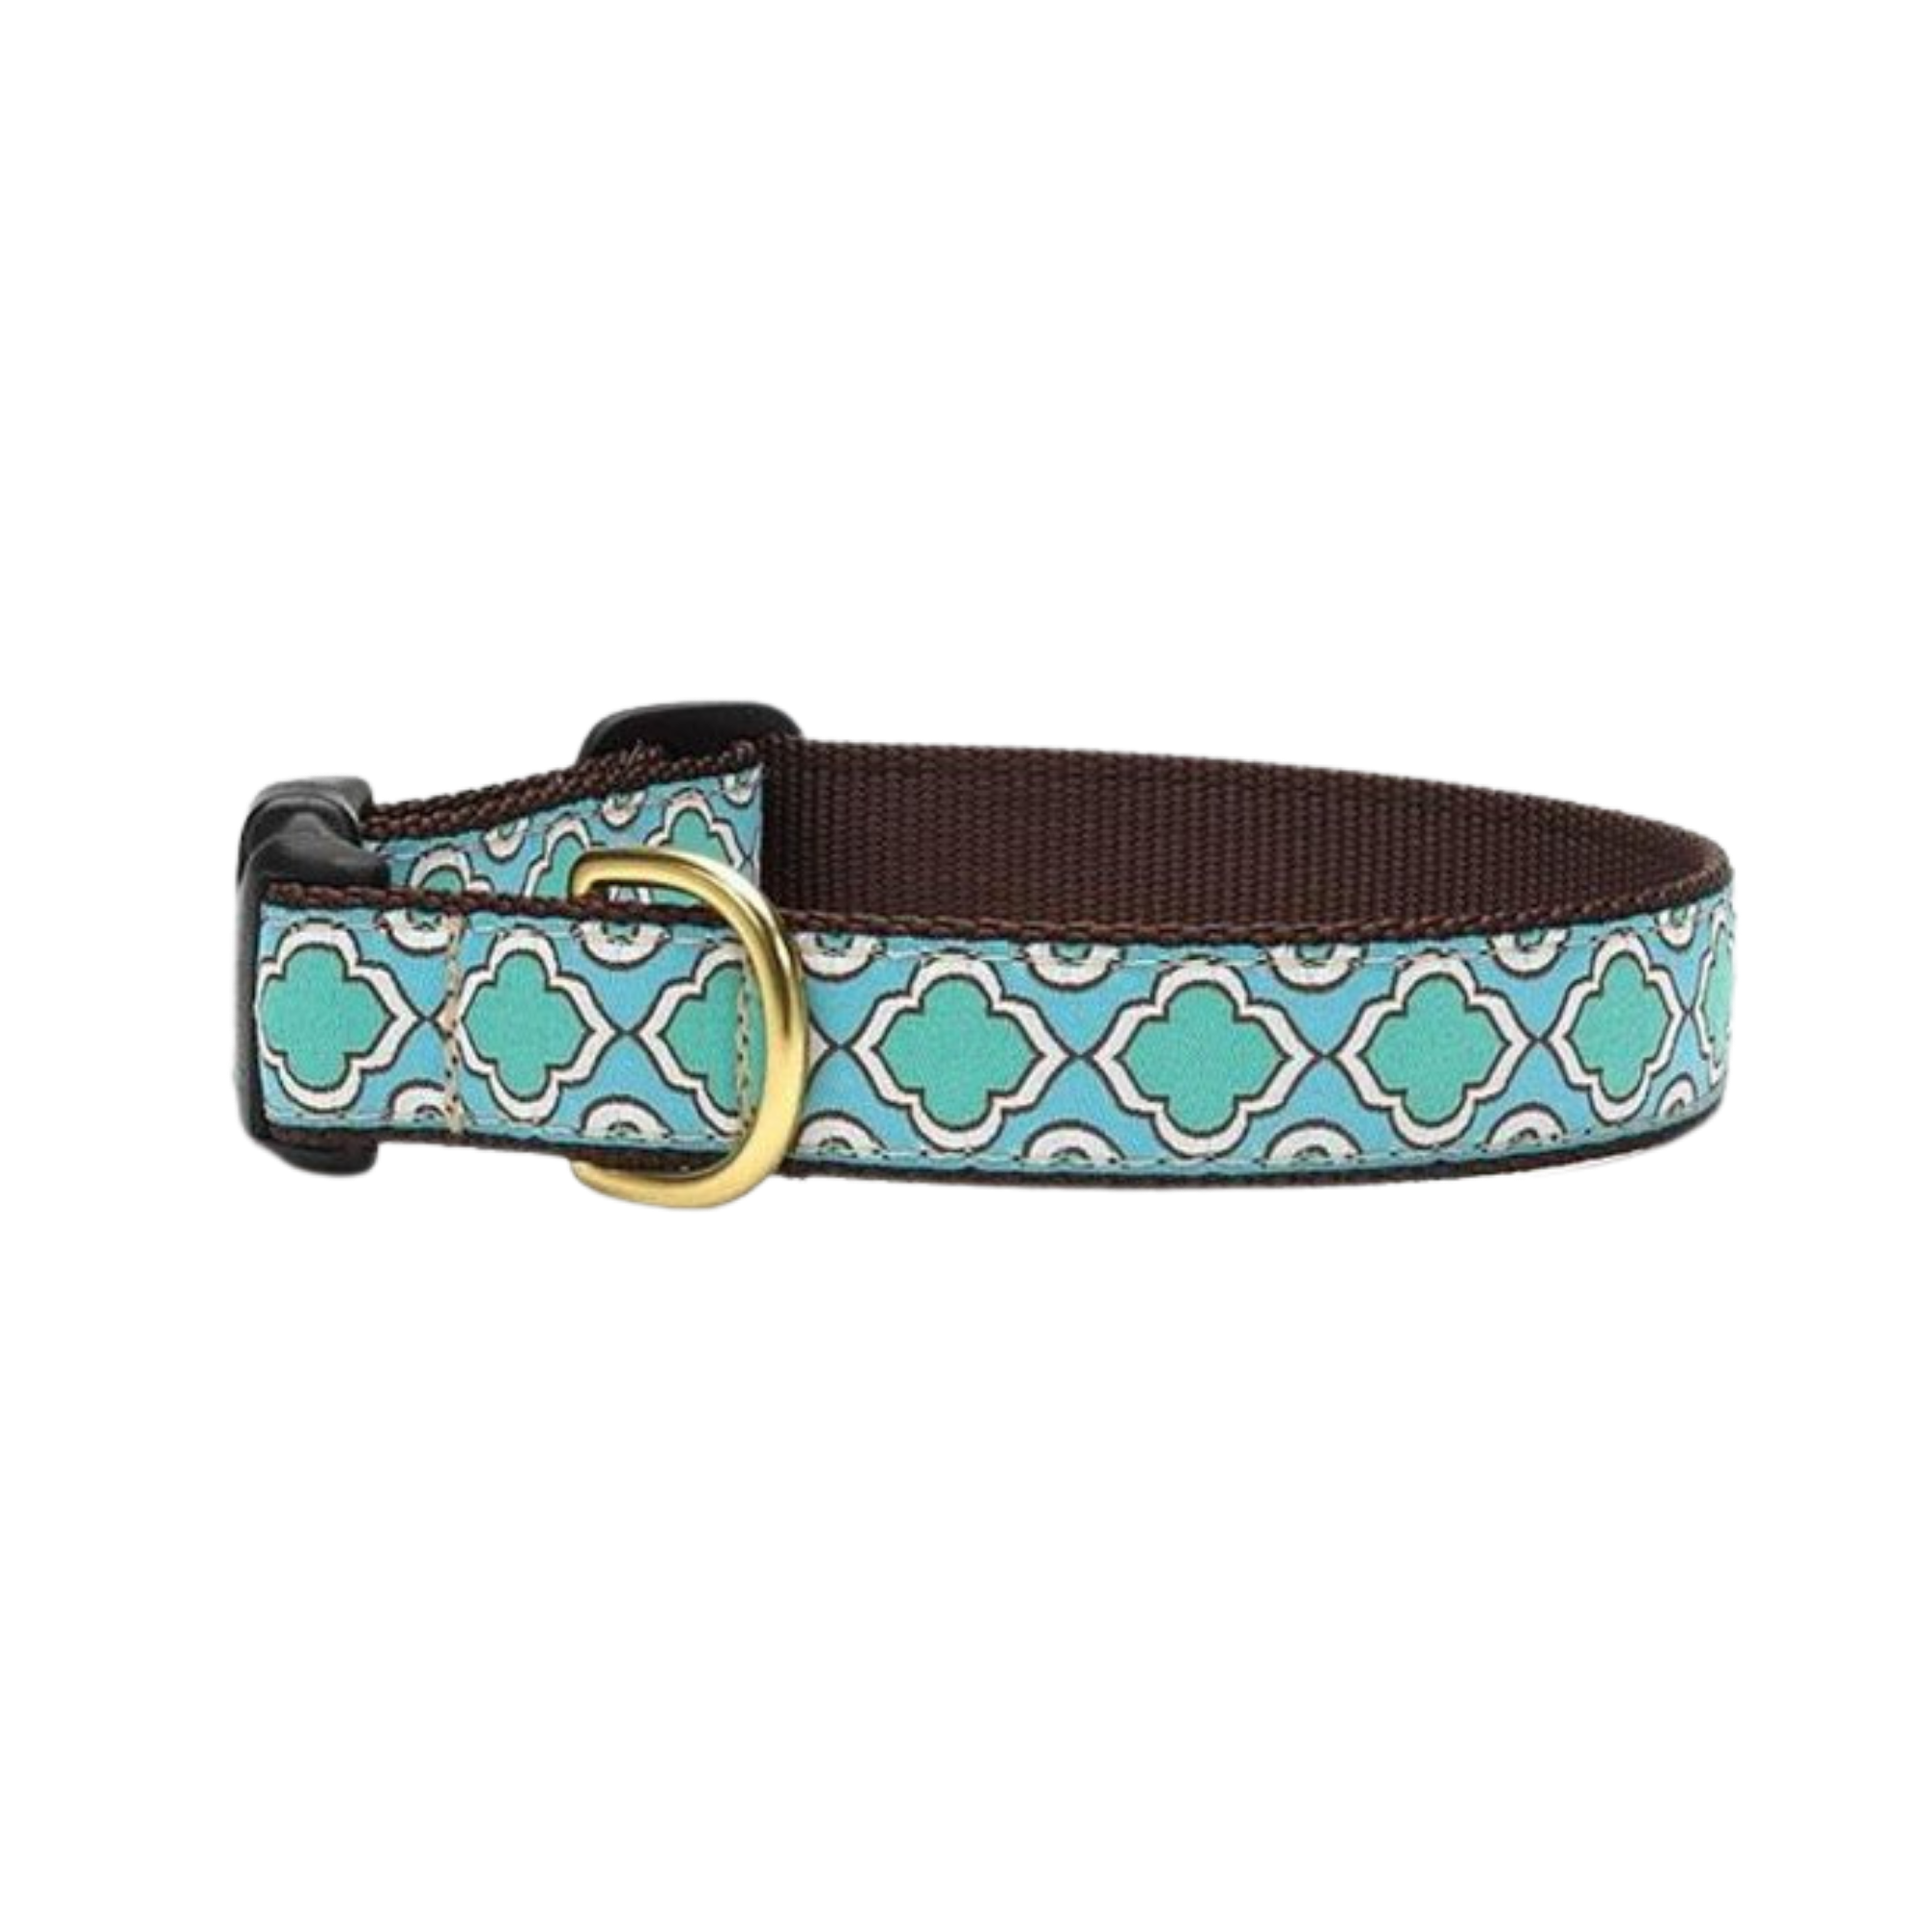 Up Country Seaglass Dog Collar - Mutts & Co.